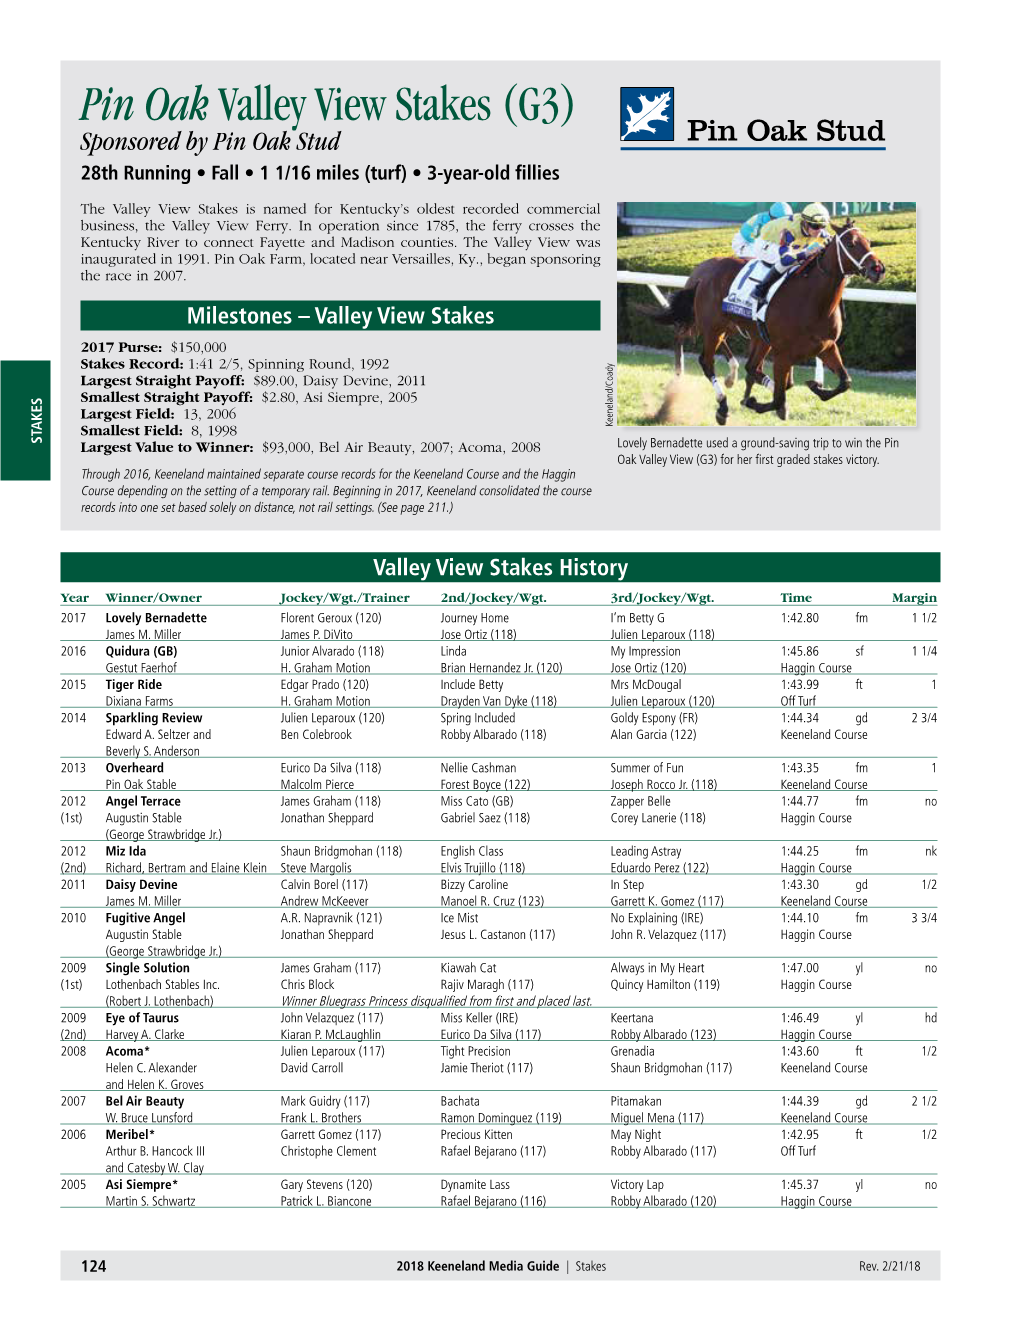 Pin Oakvalley View Stakes(G3) Course Depending on the Setting of a Temporary Rail